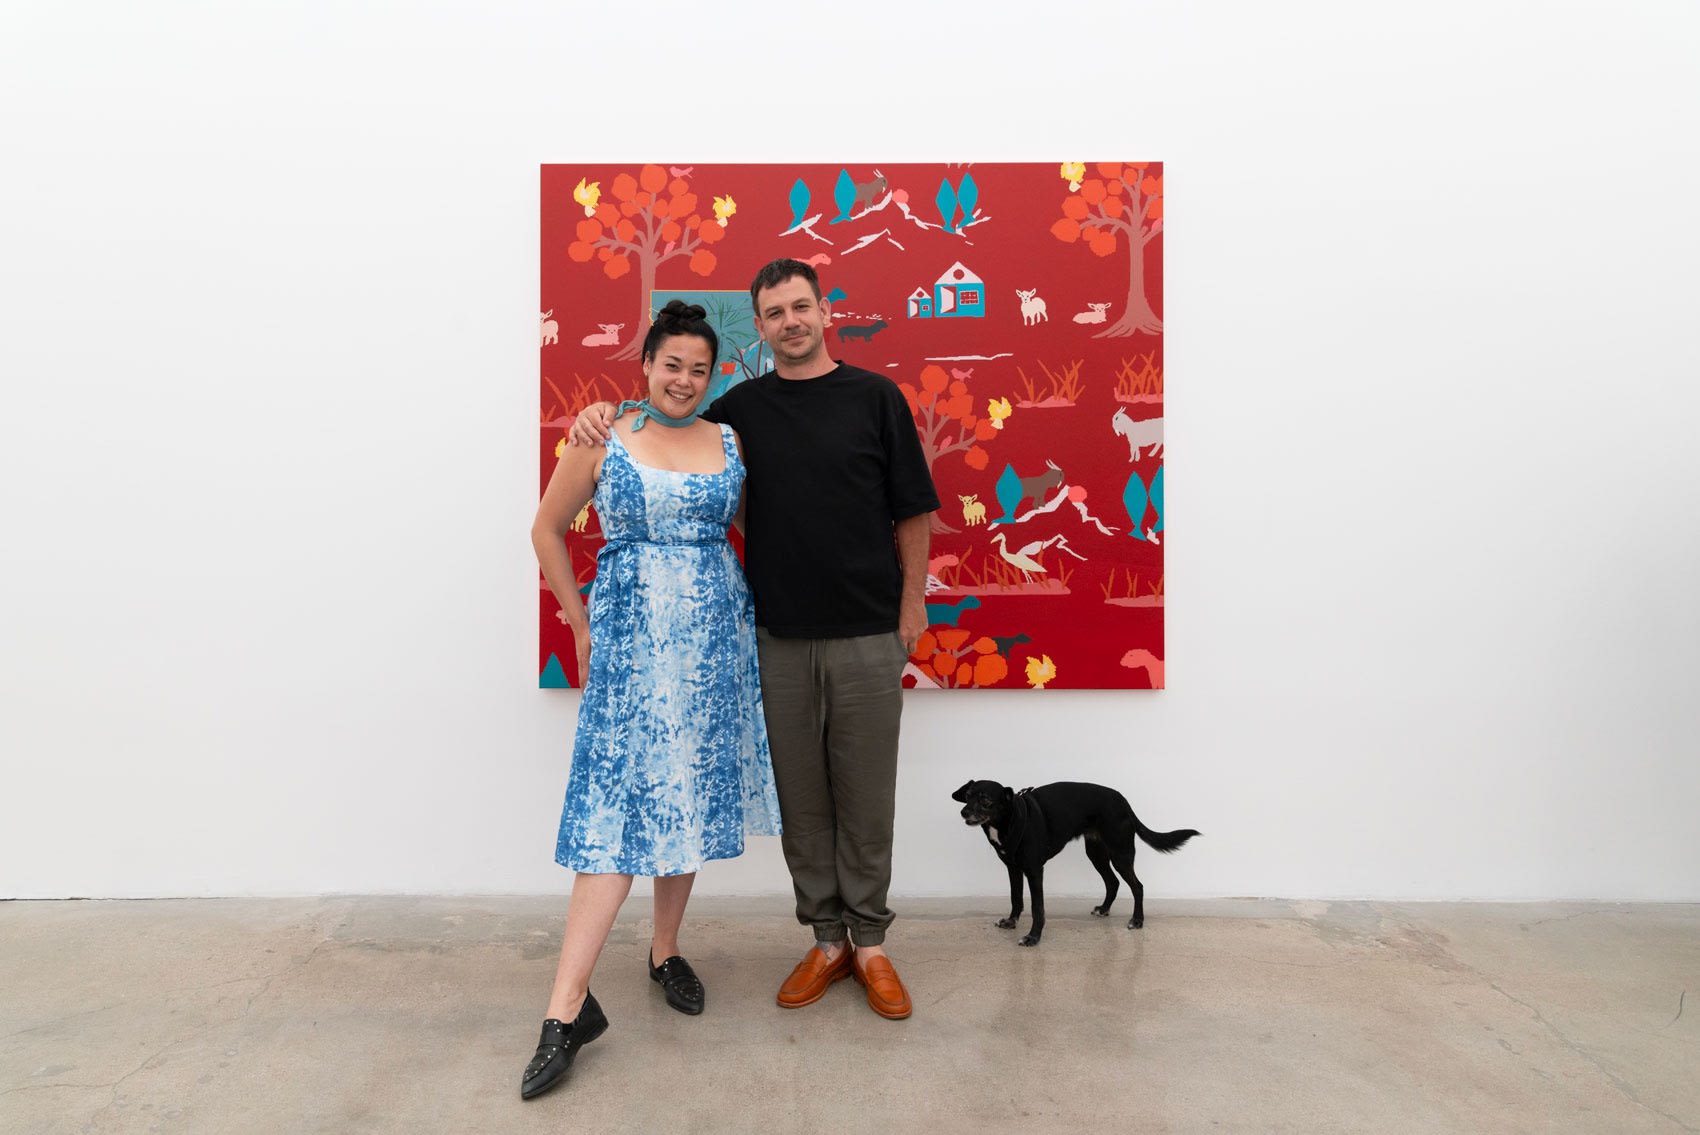 Dasha Matsuura poses in a blue and white dress with Francisco Díaz Scotto, who wears a black weater and white cat eye sunglasses, in front of his large red painting on a white wall. Meera, a small black dog, walks towards them in the bottom right of the frame. 